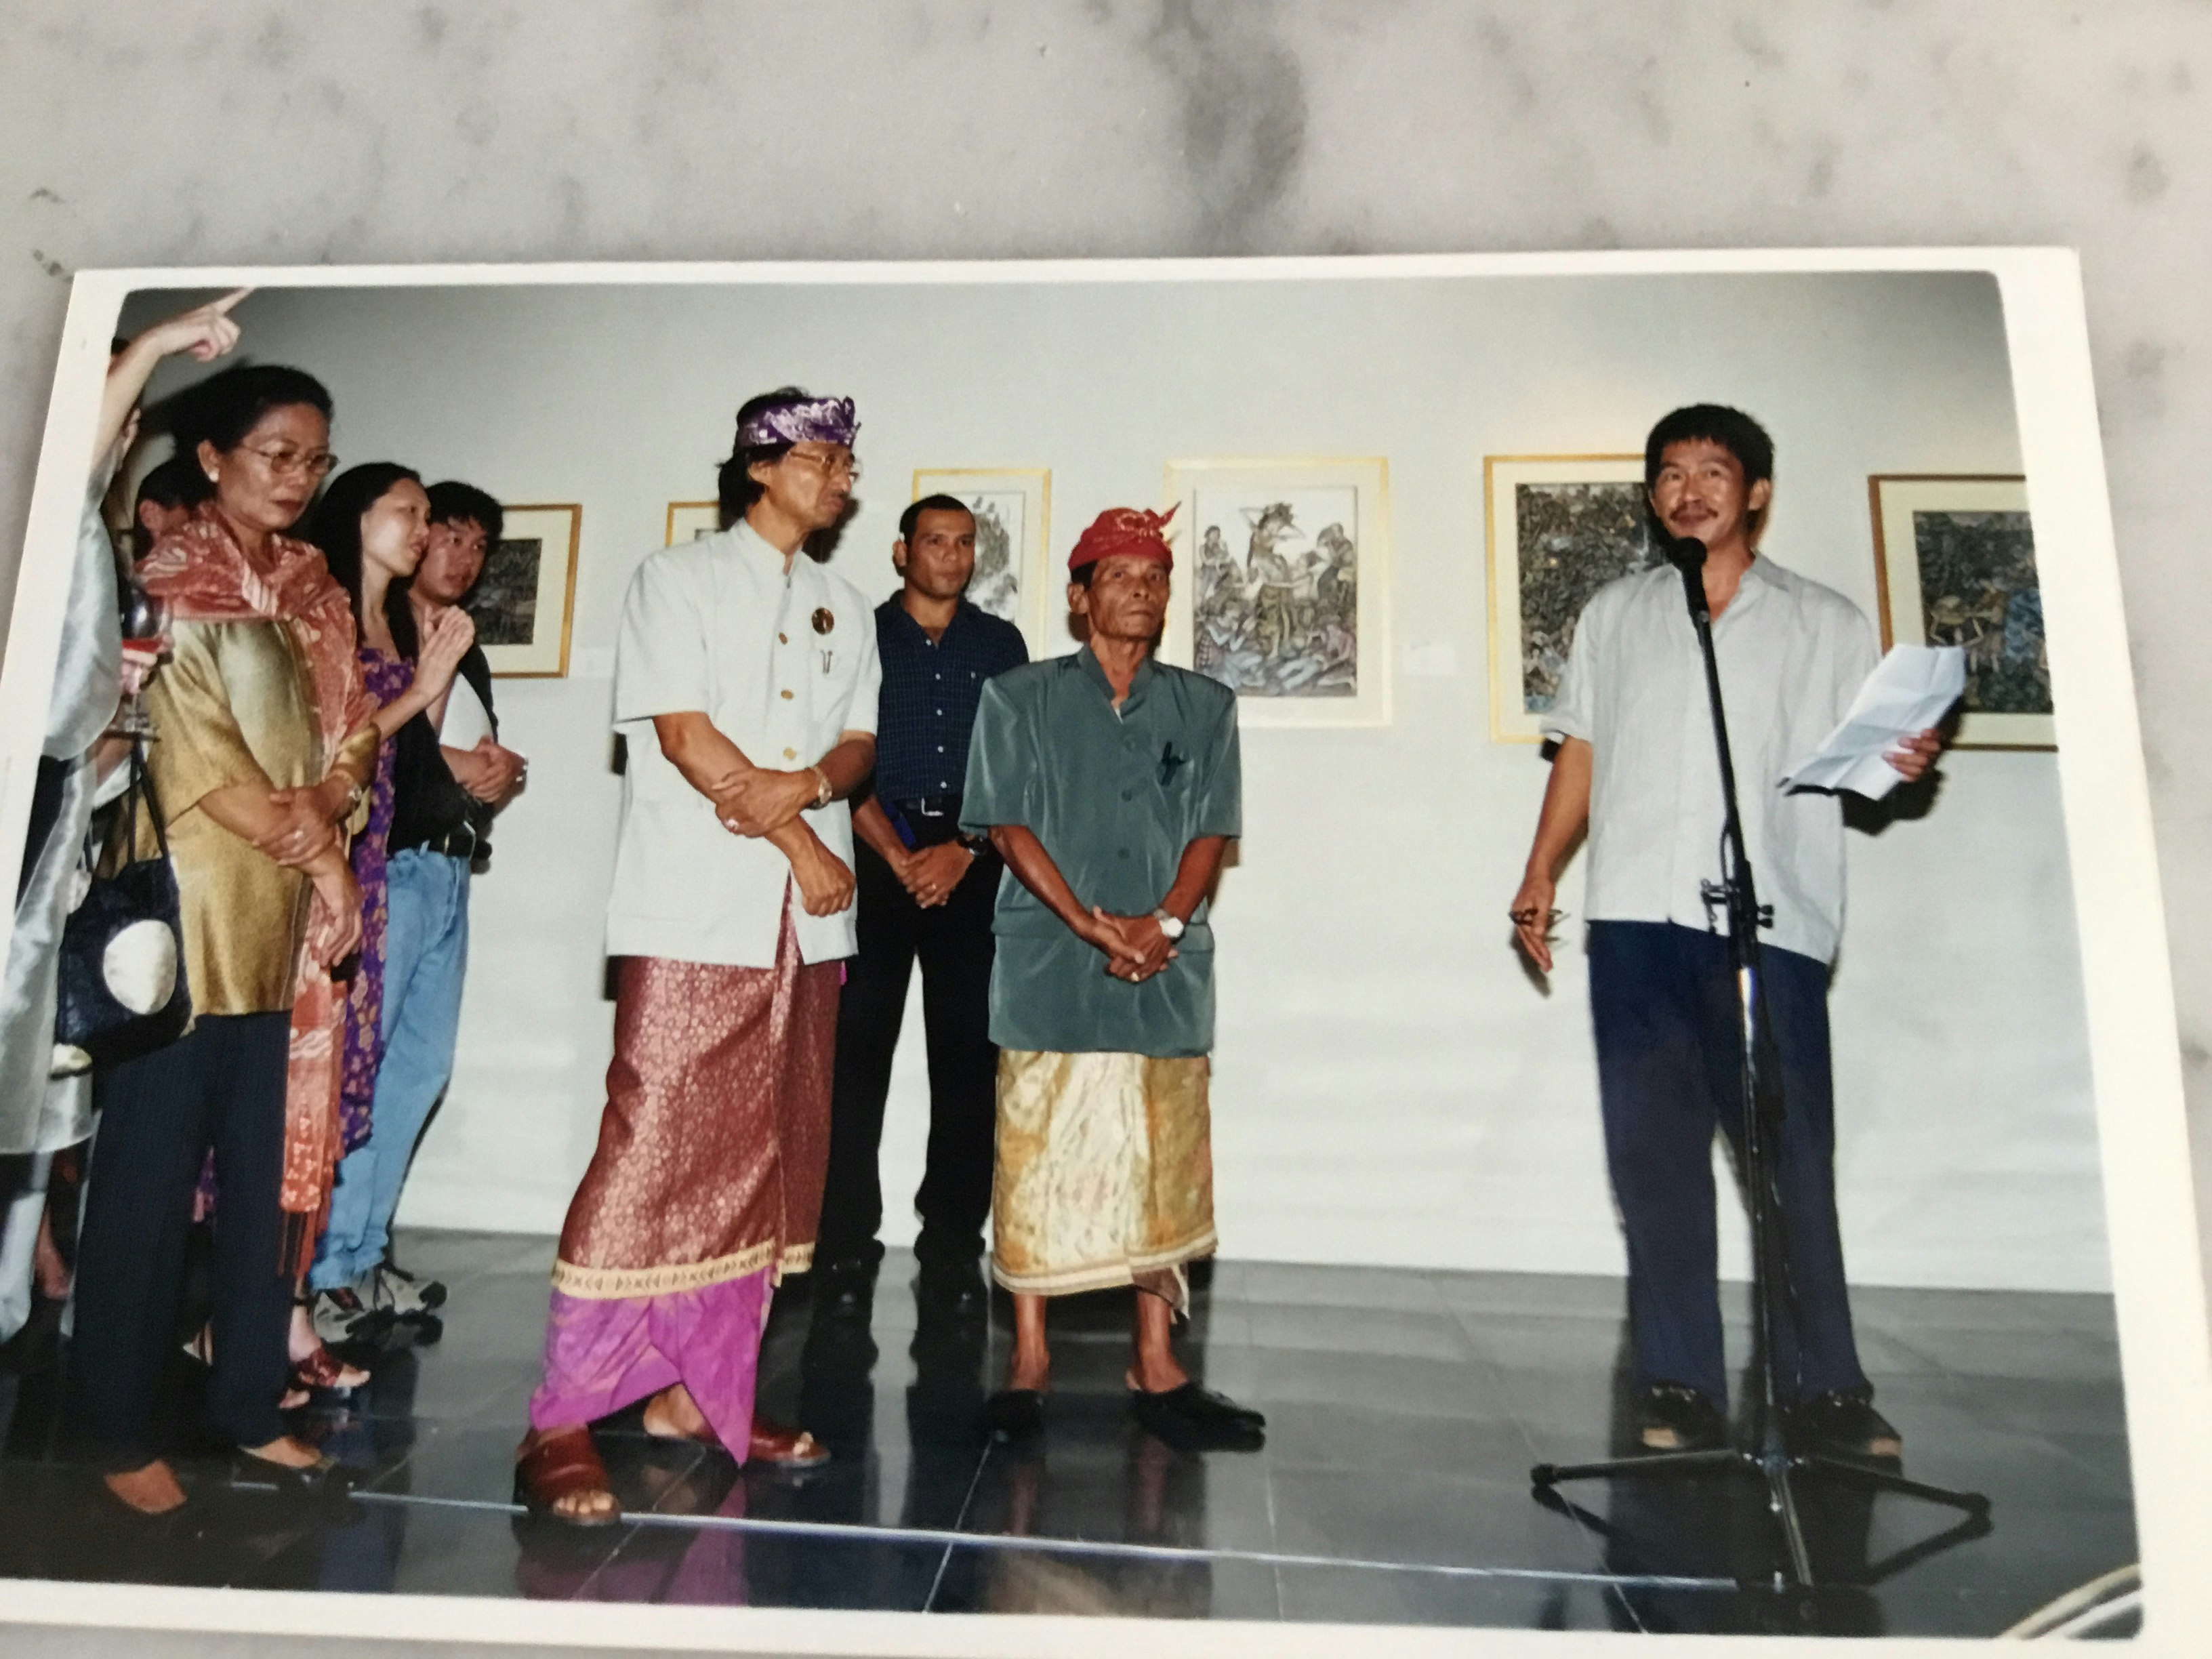 A man in a button up shirt and long navy pants stands at a microphone with a piece of paper in his hand. On his right is a group of people of Southeast Asian appearance, some of whom are wearing batik sarongs and scarves tied around their heads.